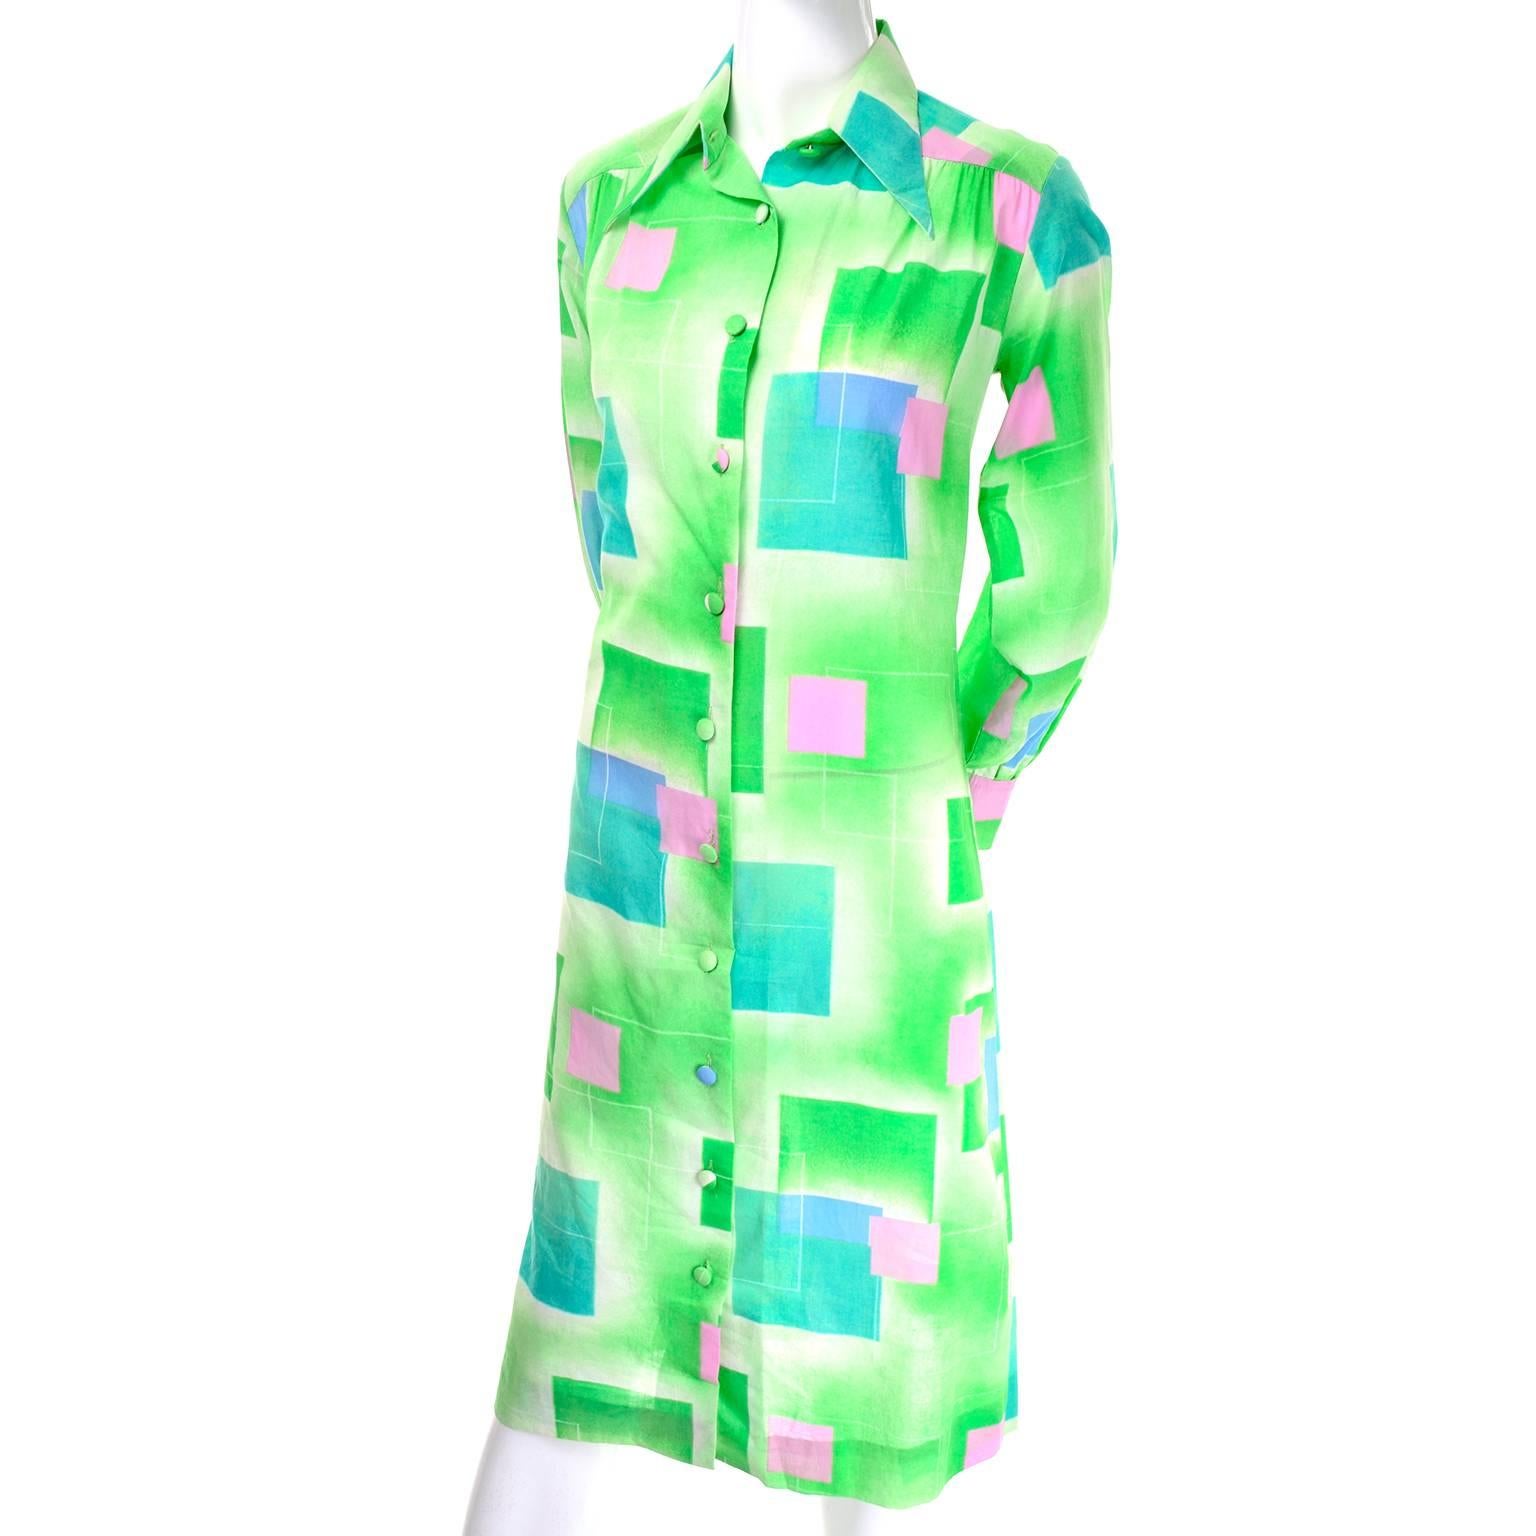 1970s Lanvin Vintage Dress in Geometric Graphic Green Blue and Pink Print 8/10 1